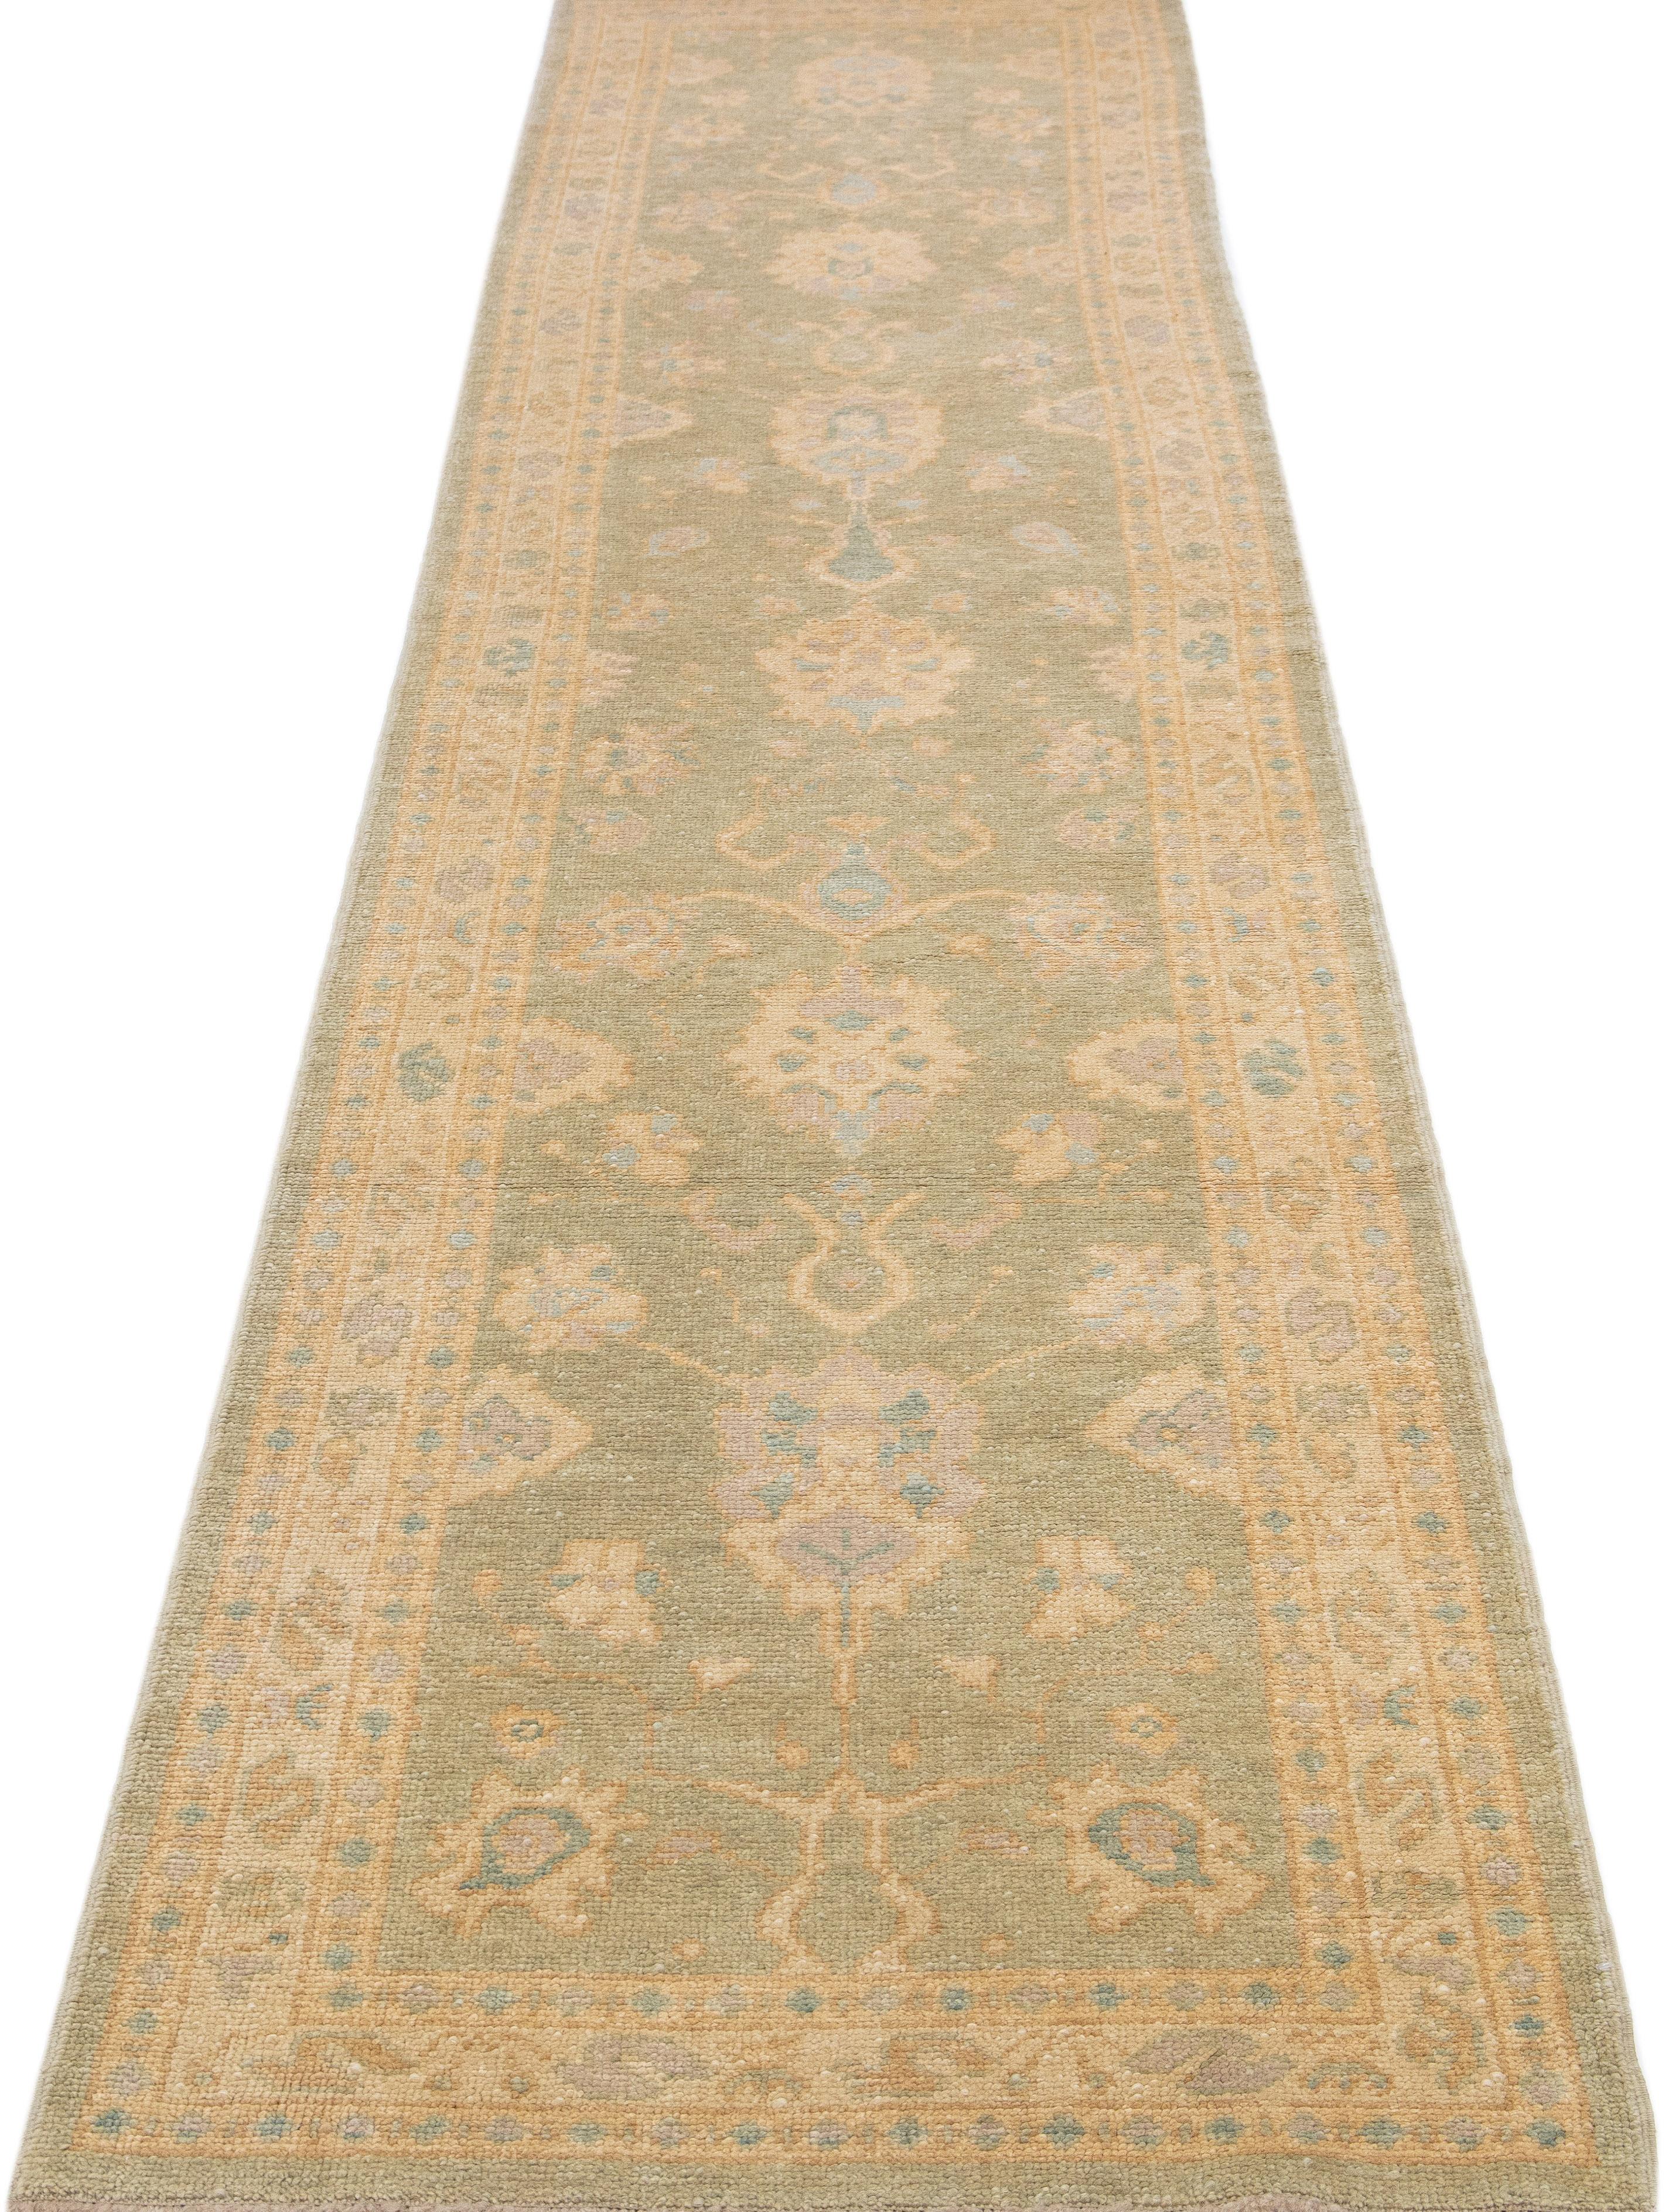 Beautiful Modern Turkish hand-knotted wool rug with a light brown color field. This rug has a designed frame with accent colors of tan and blue in a gorgeous all-over geometric floral design.

This rug measures: 3'1